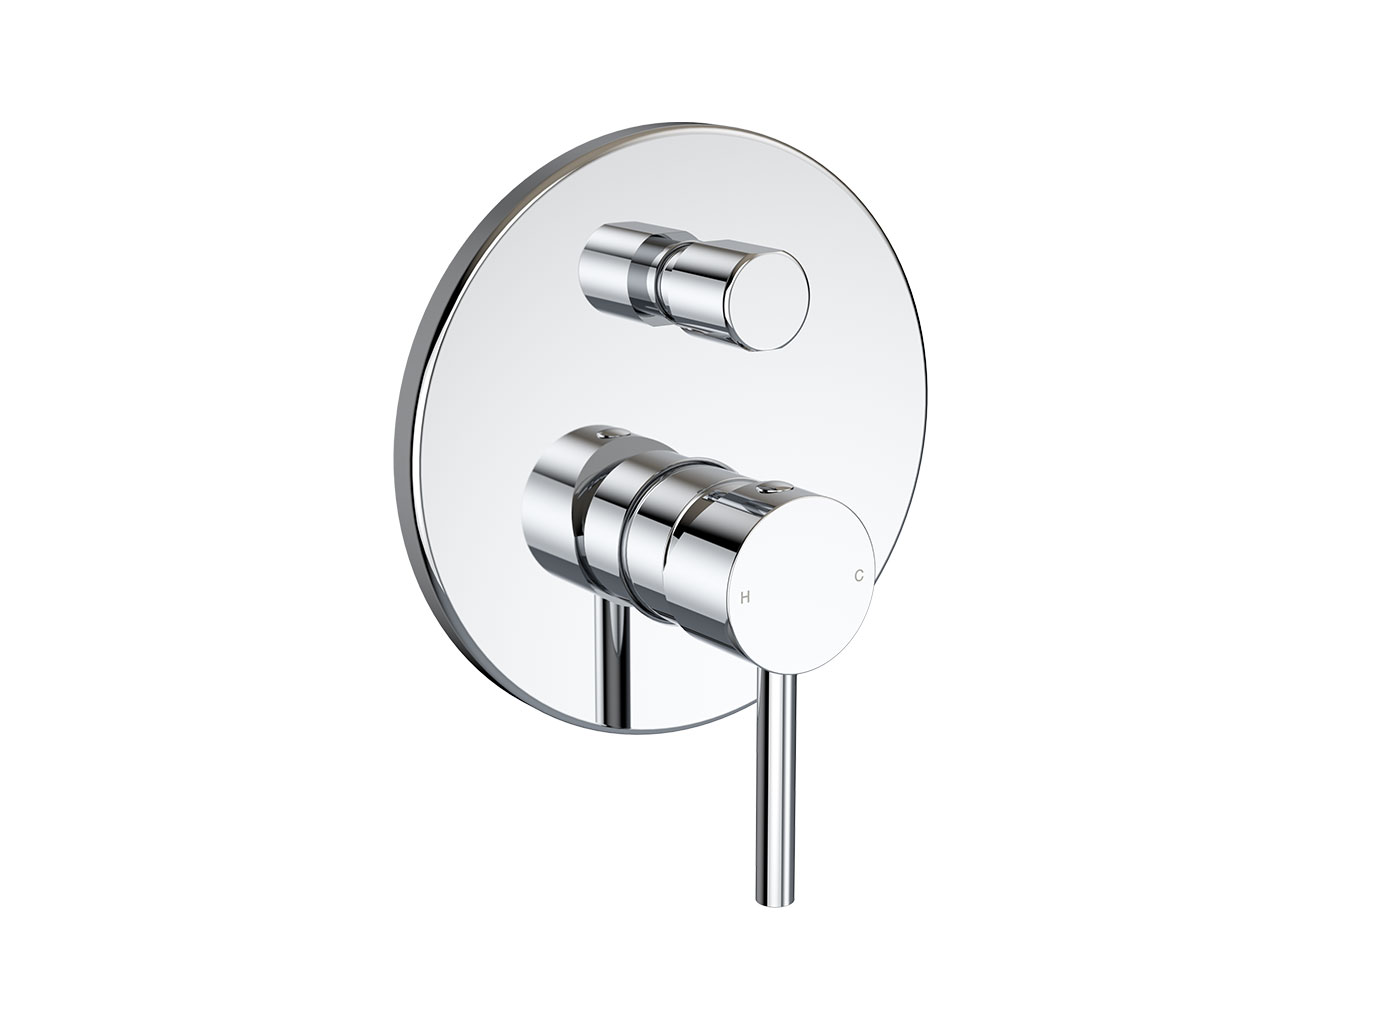 Stylus continues to bring you simplicity and functionality across contemporary designs to suit any bathroom and budget Blaze Pin is characterised by its pin handle